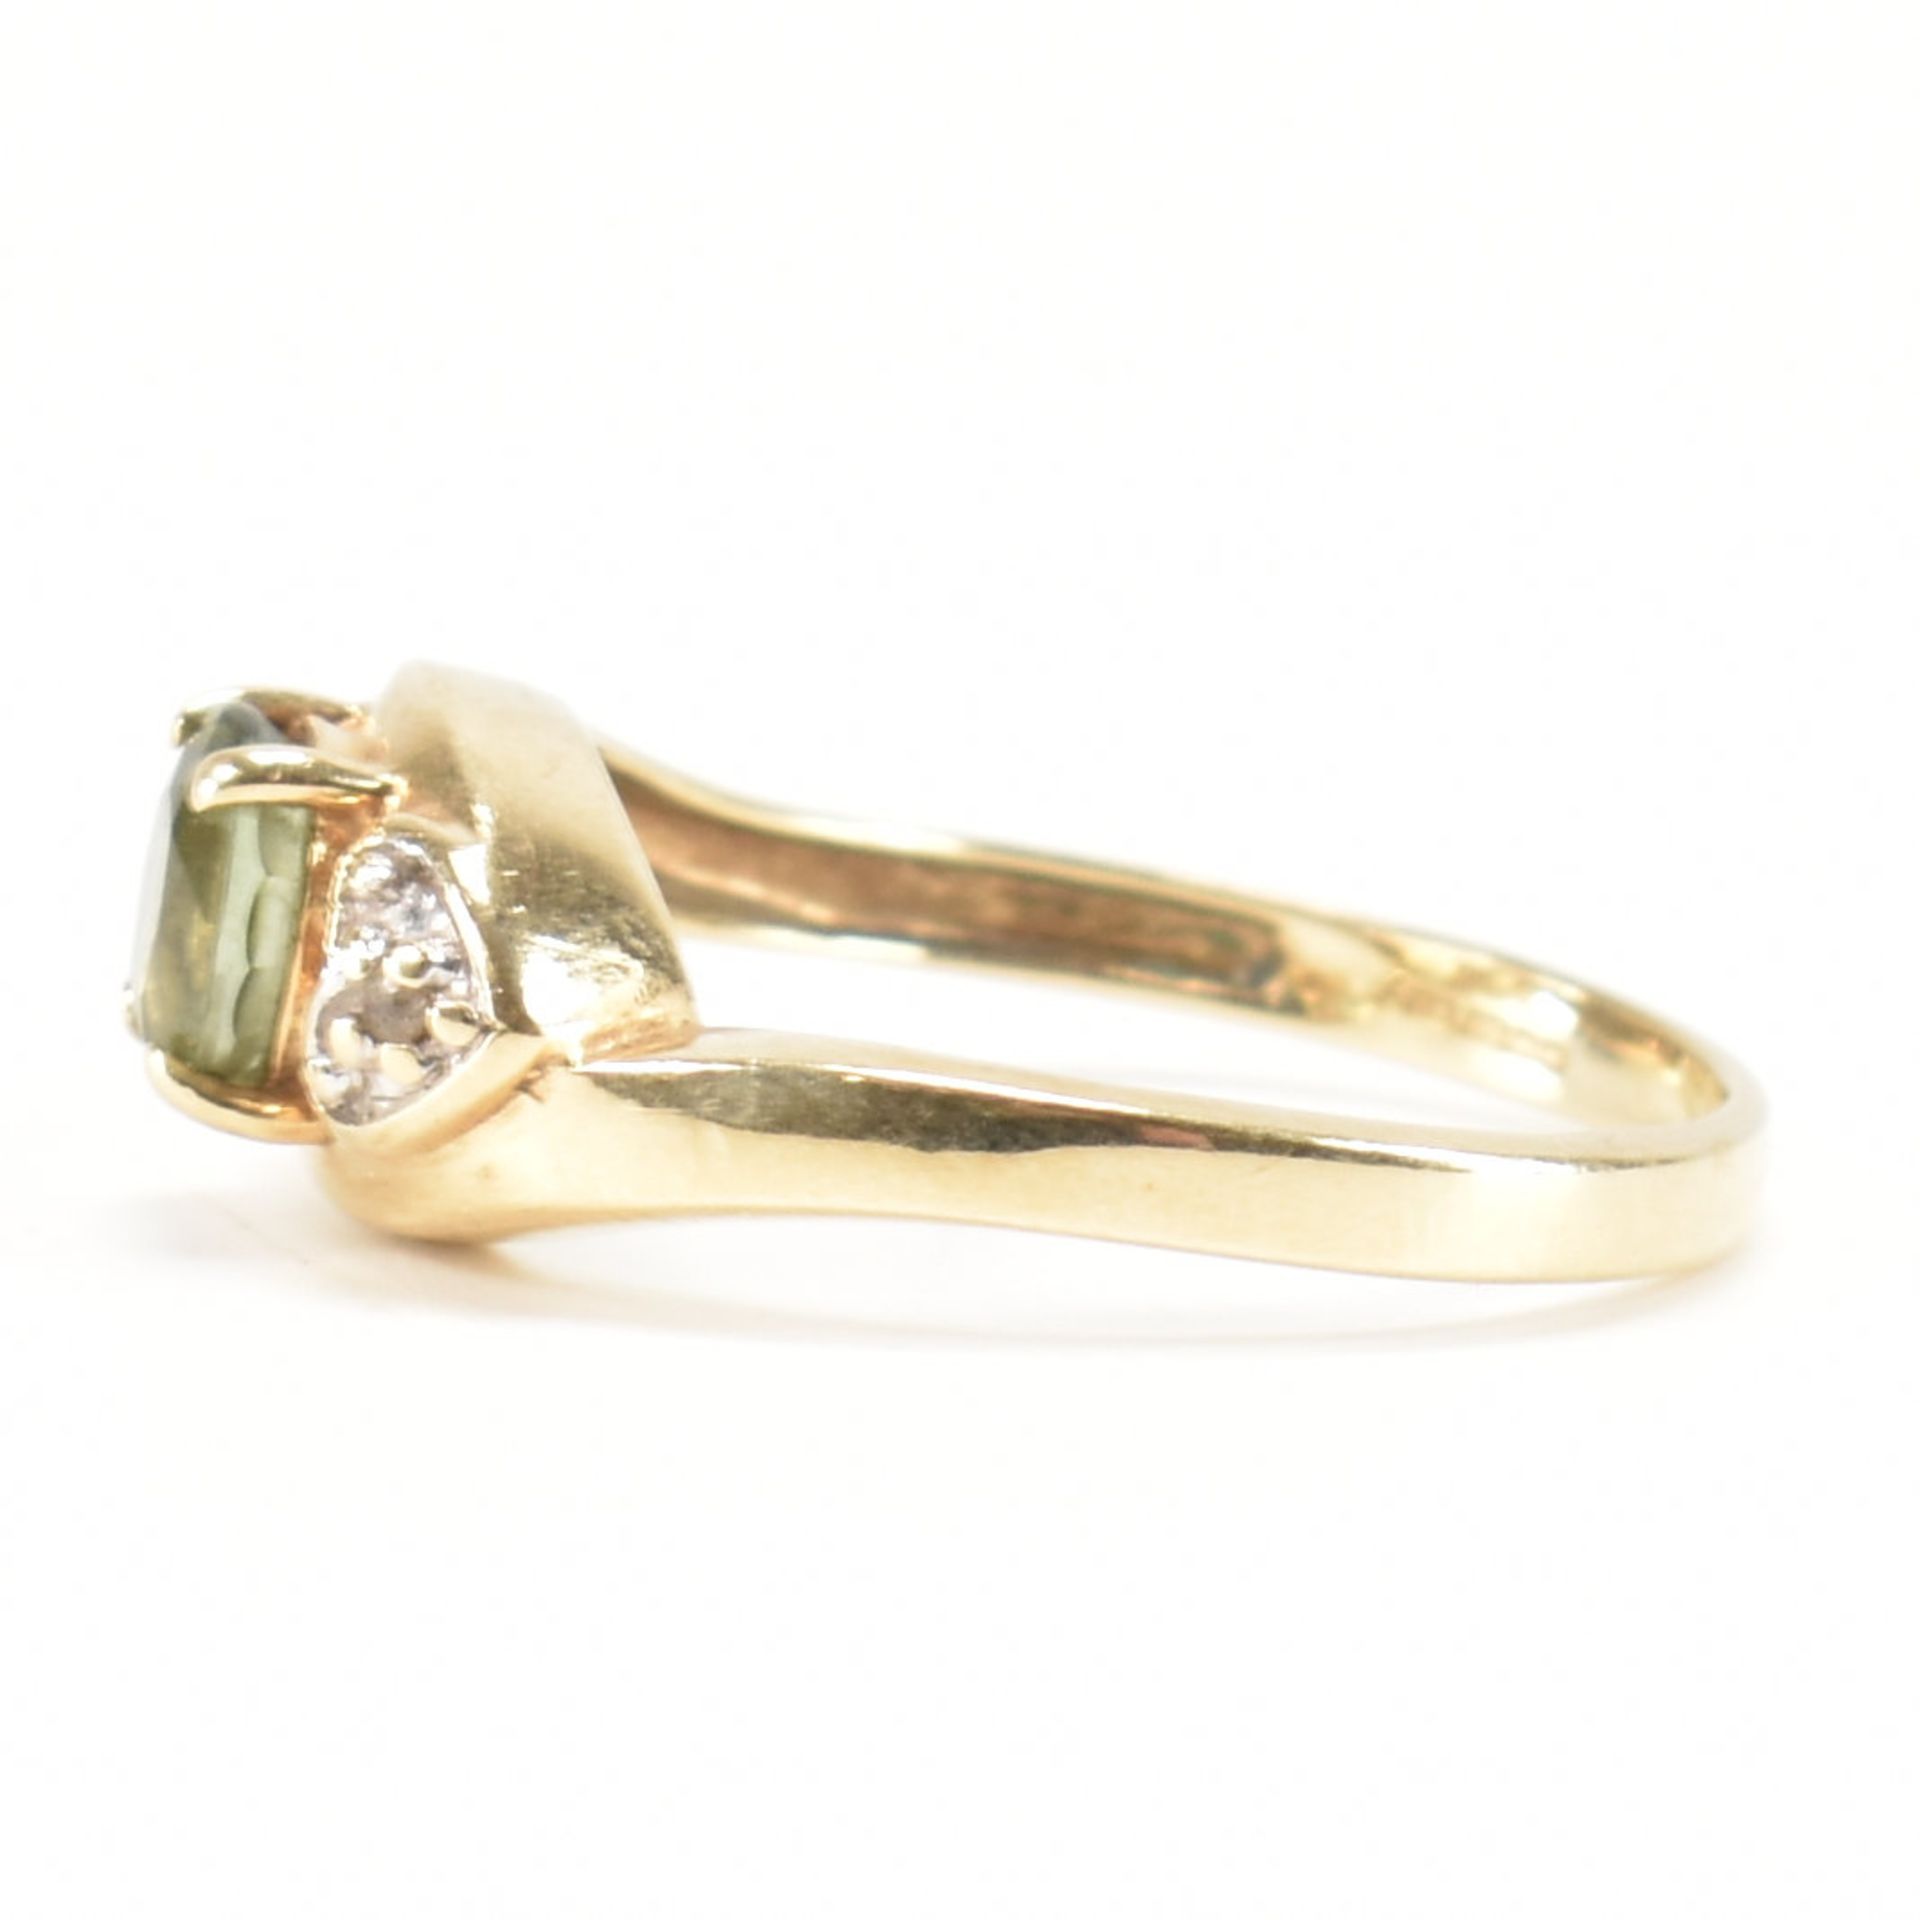 HALLMARKED 9CT GOLD & GREEN STONE CROSSOVER RING - Image 2 of 8